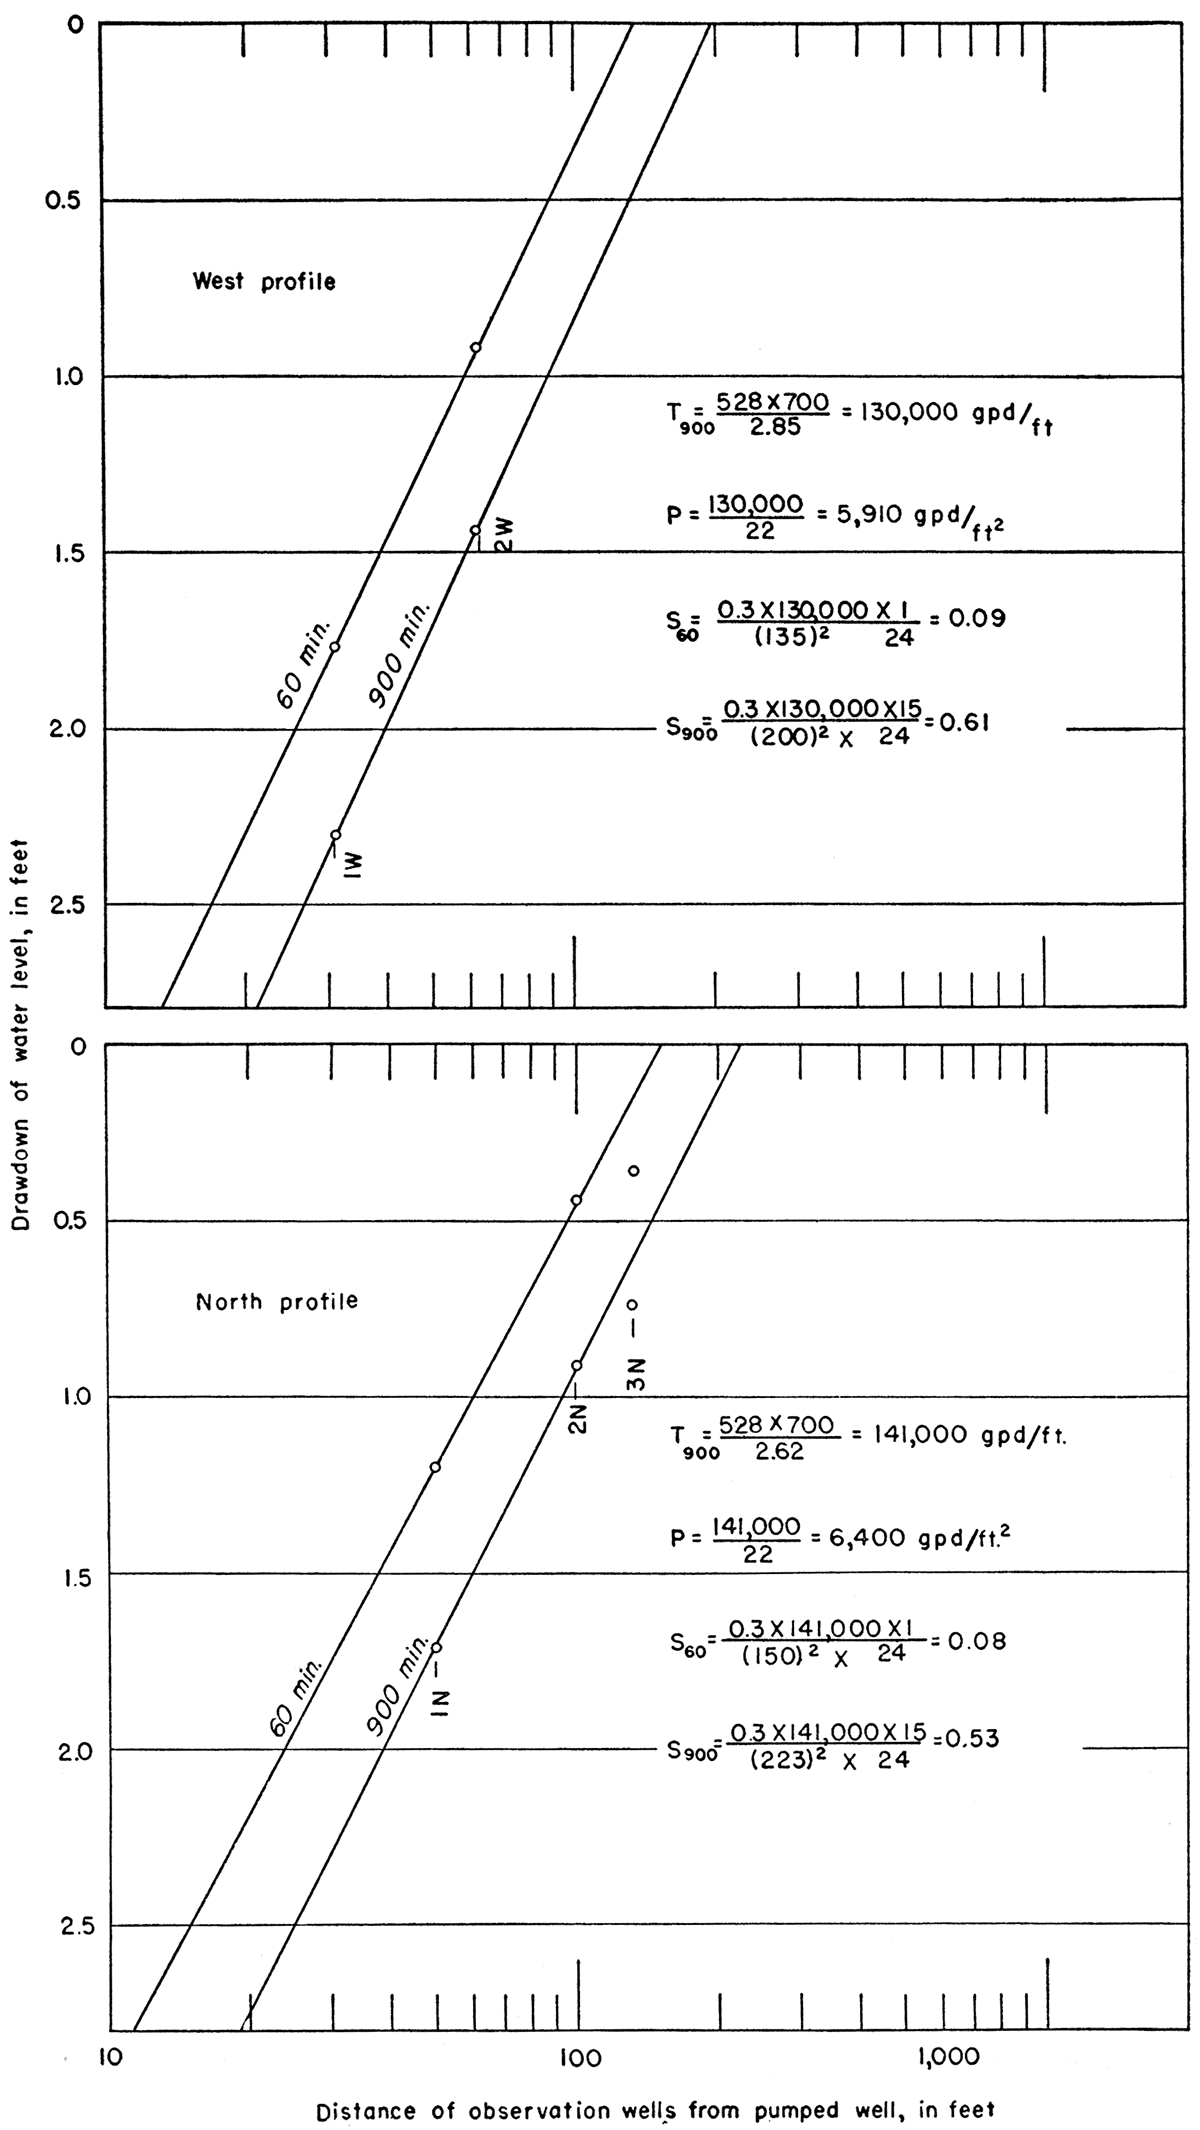 Drawdown of water levels in observation wells at 60 and 900 minutes during Norbert Irsik aquifer test plotted against distance from pumped well.